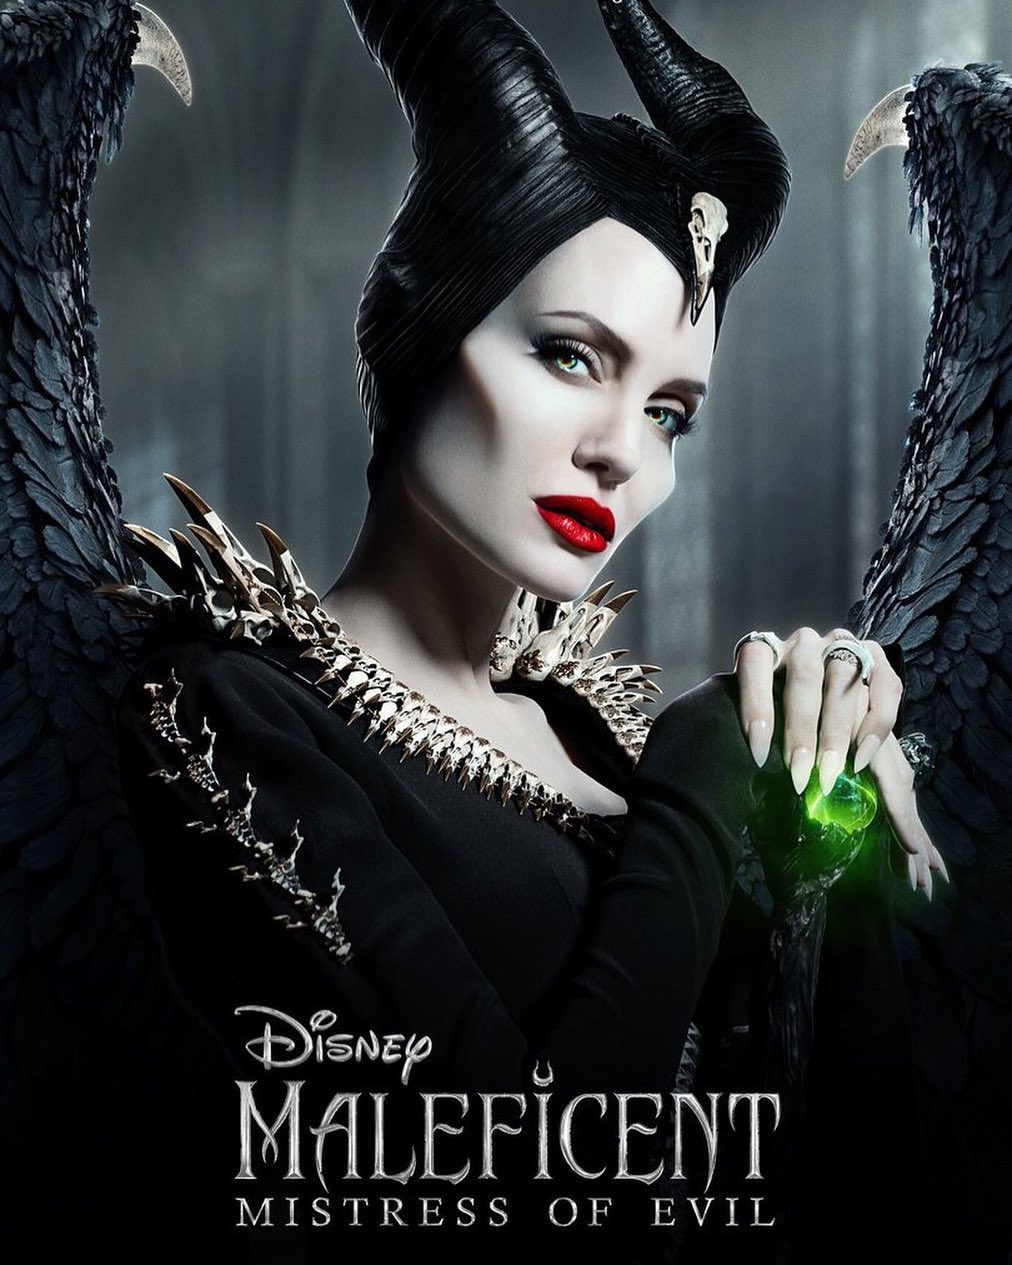 MALEFICENT: MISTRESS OF EVIL FAVORITE THEATER BUTTON